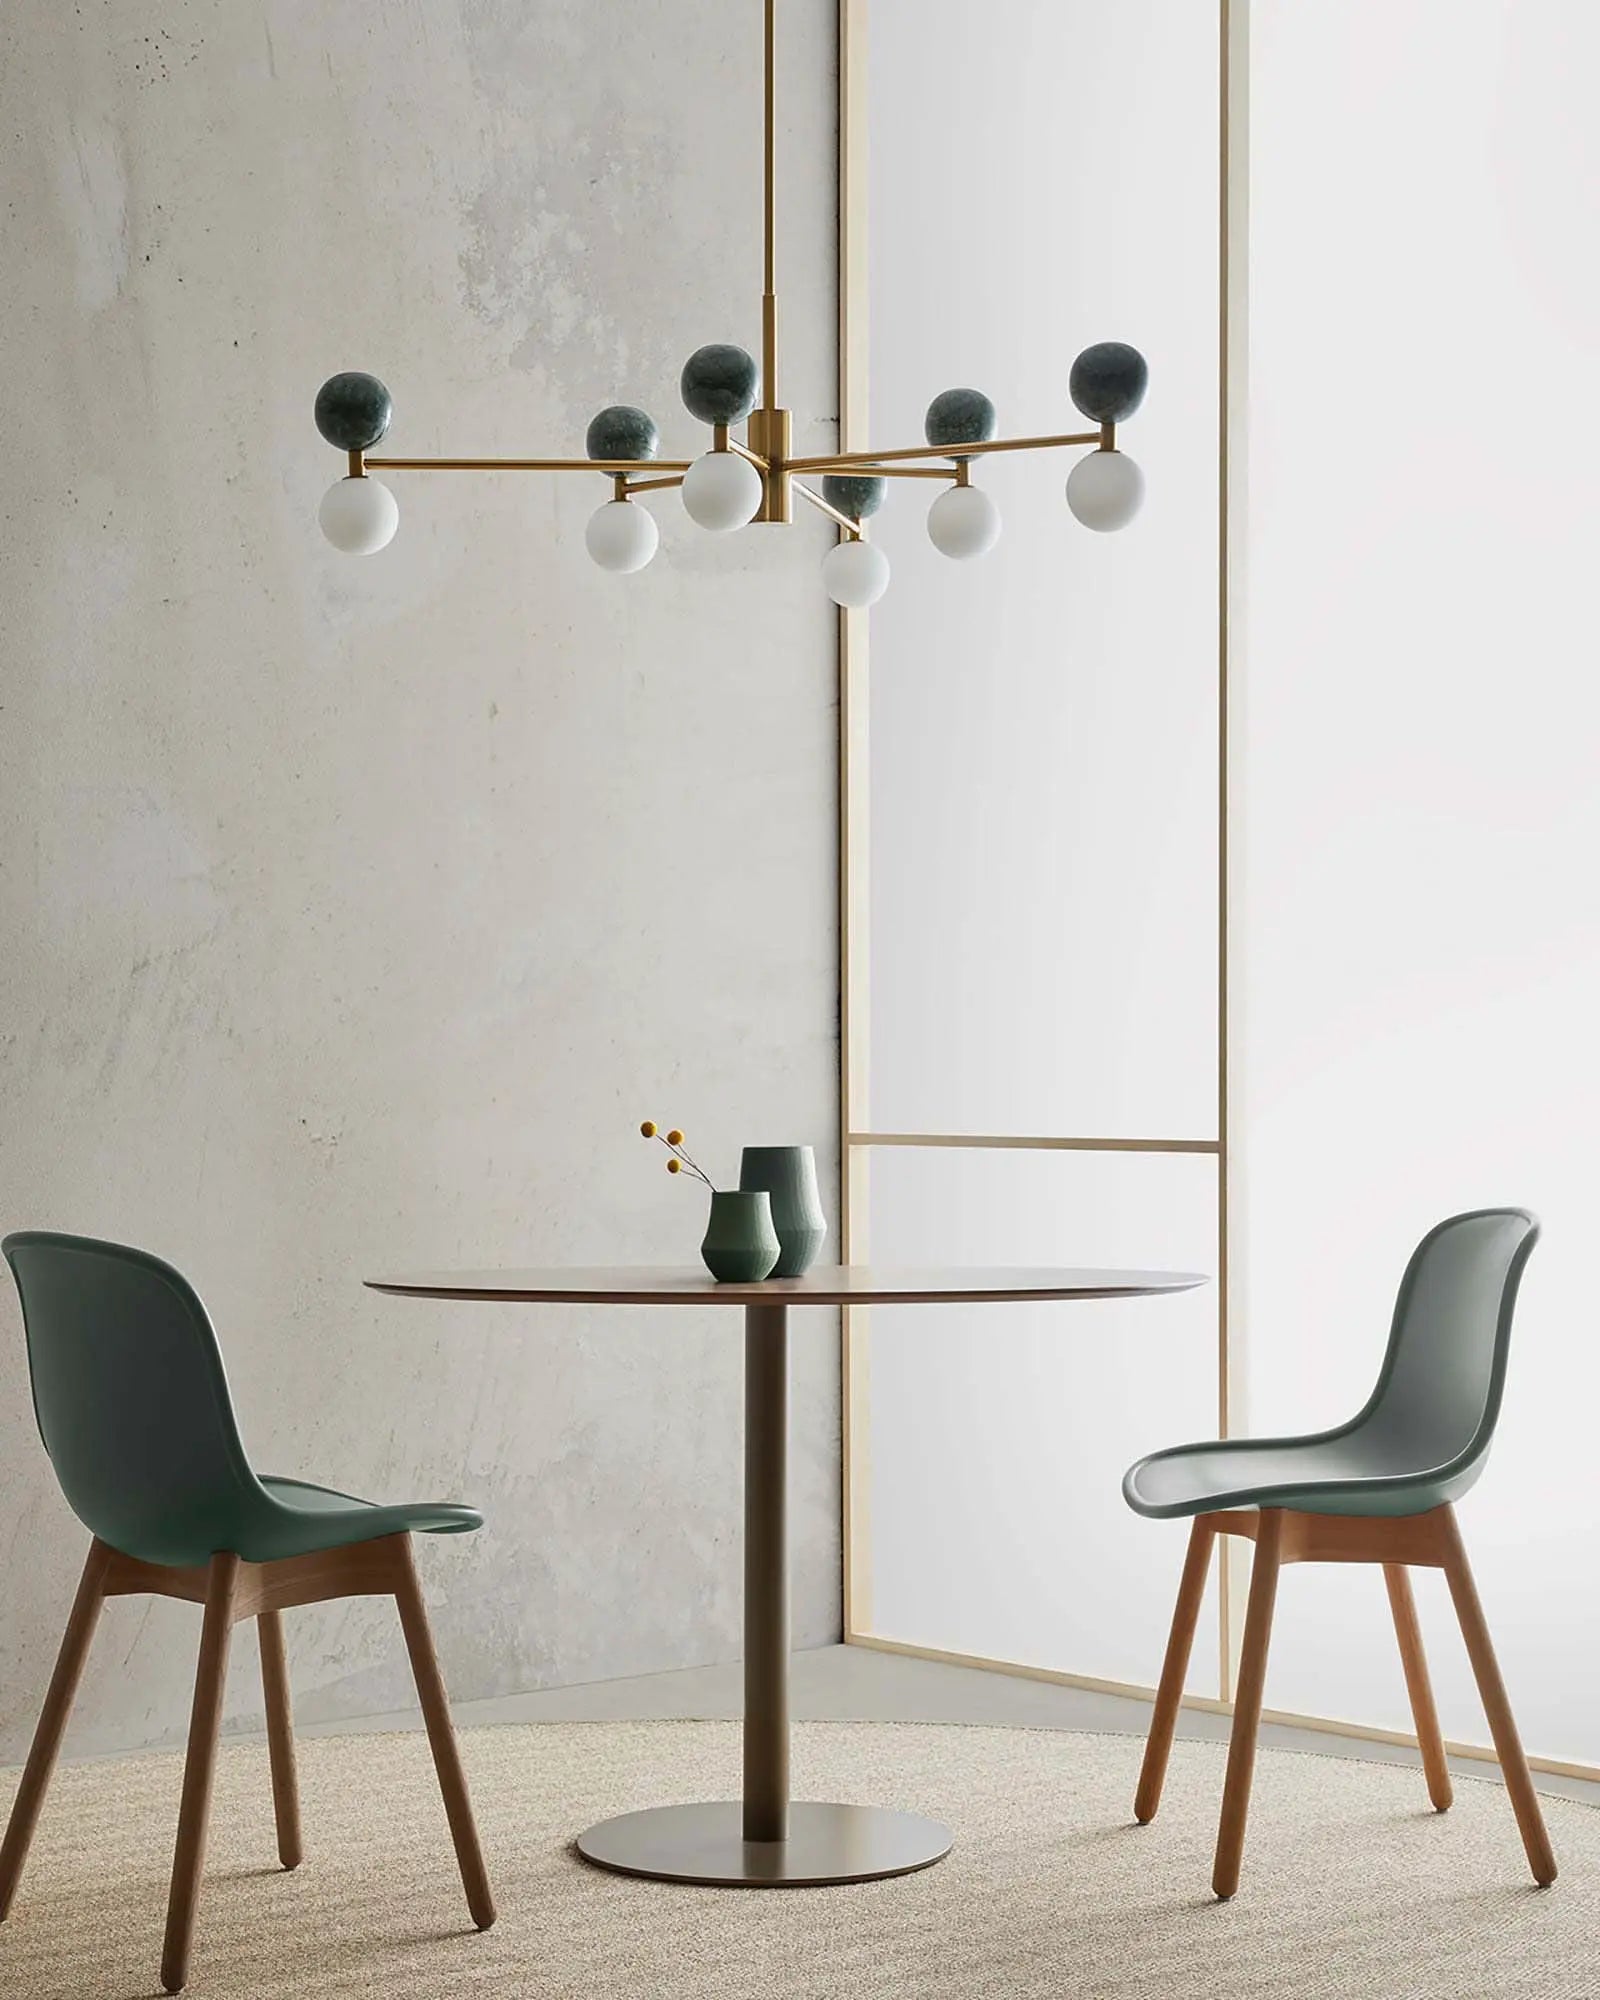 Dalt 6 pendant light marble and opal spheres in brass above a round table